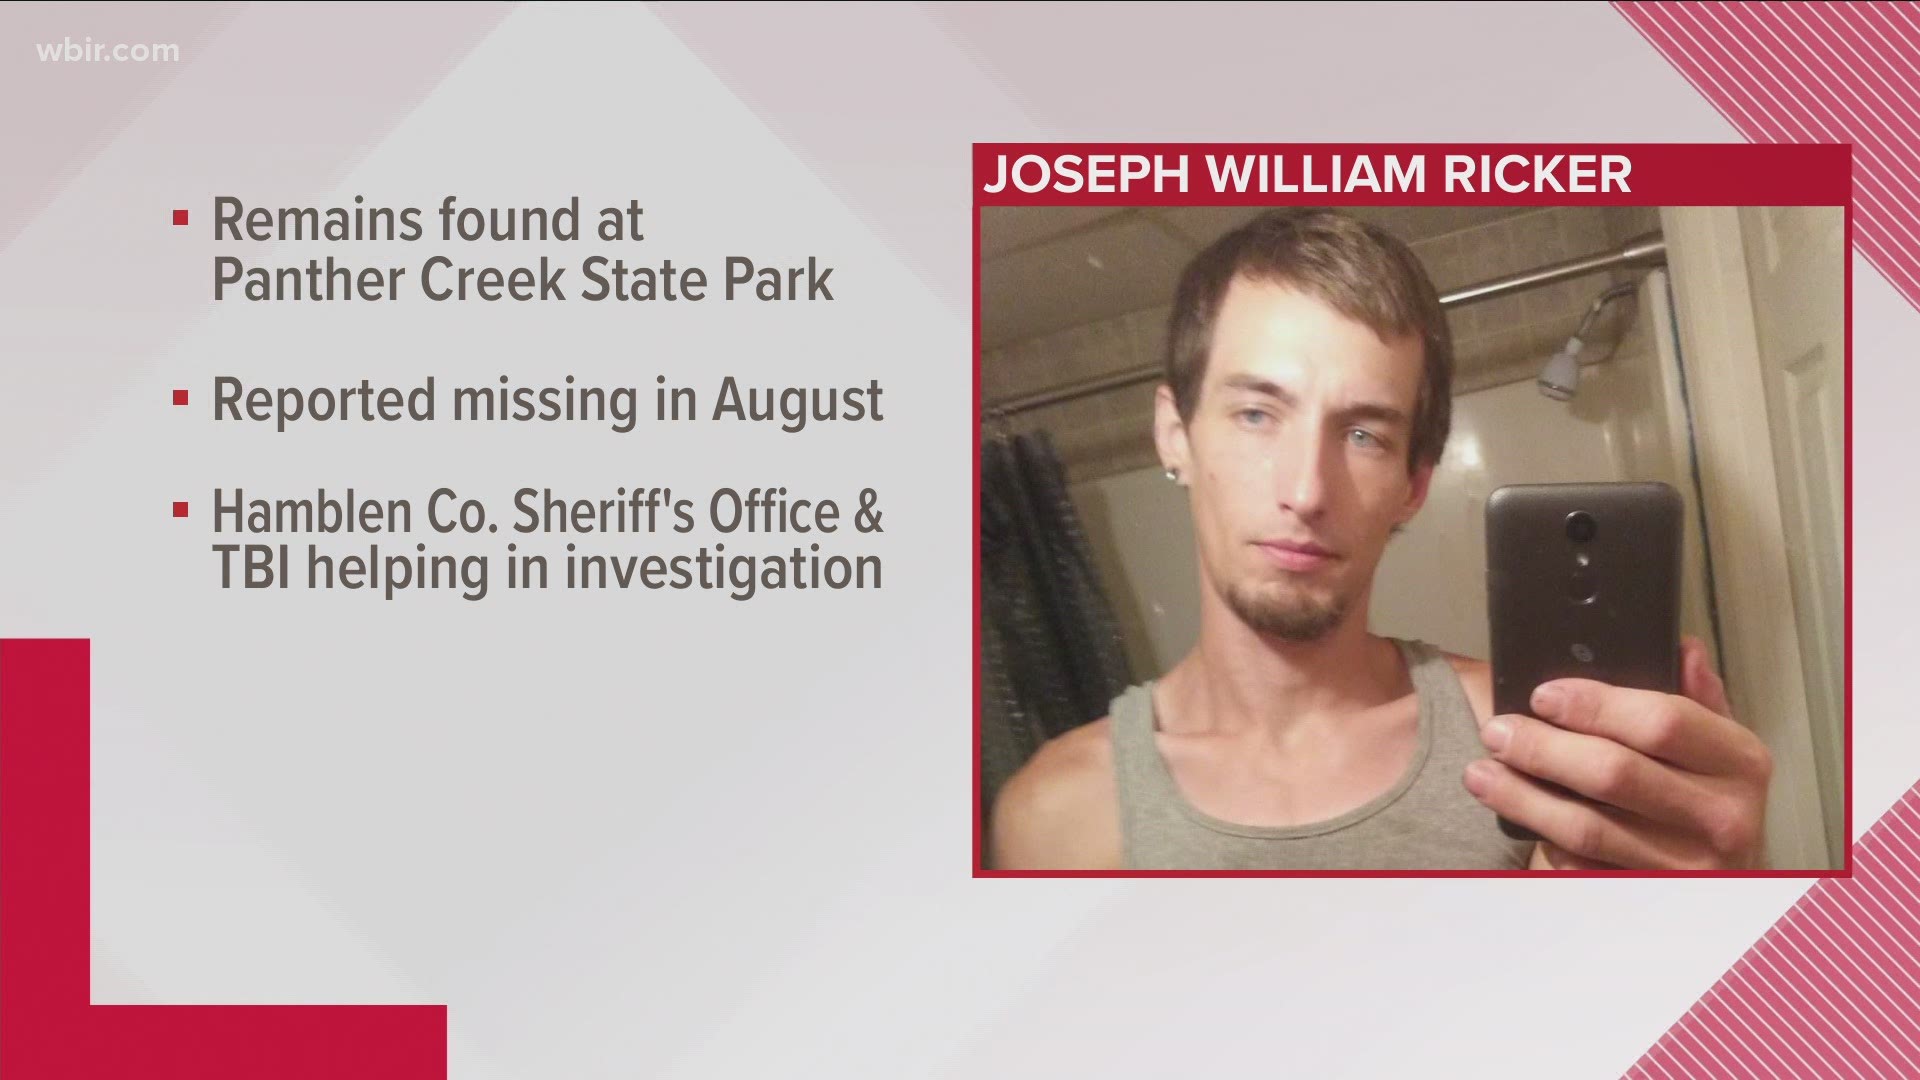 The bones found last week in Panther Creek State Park have been identified as those of 28-year-old Joseph William Ricker. Ricker had been missing since late August,